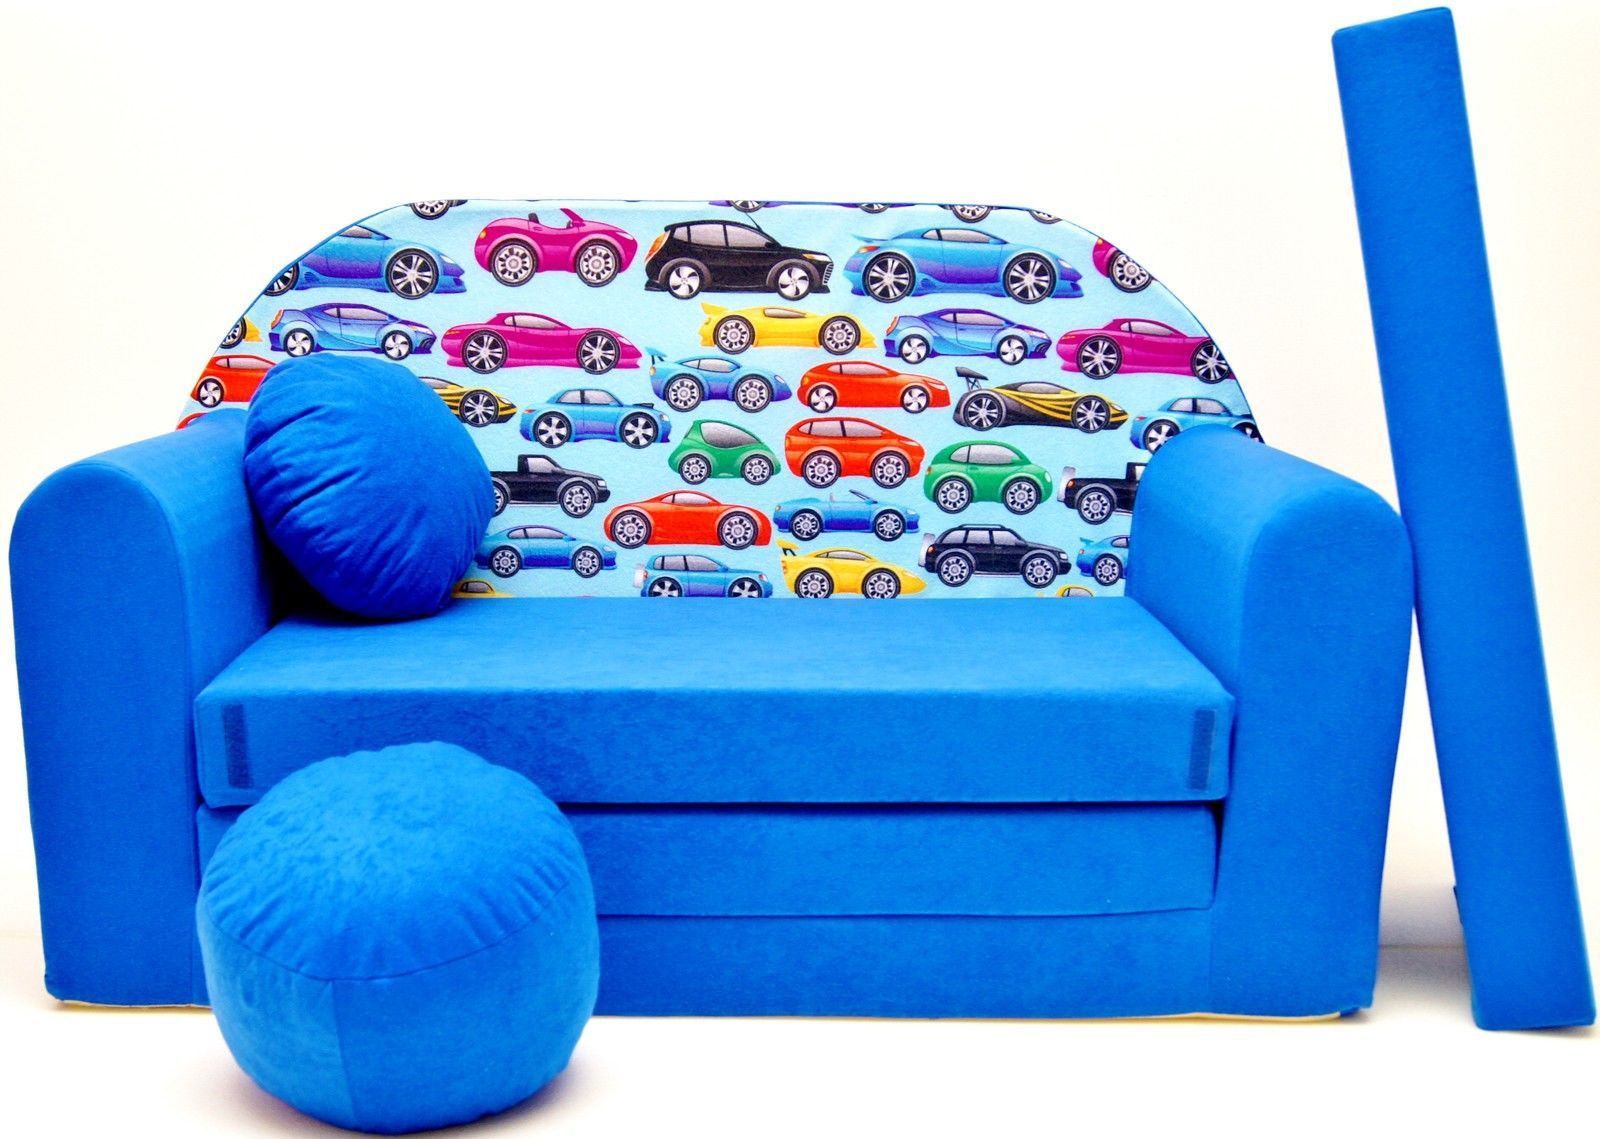 Childrens Sofa Bed Type W, Fold Out Sofa Foam Bed For Children + Free Intended For Children's Sofa Beds (Gallery 1 of 20)